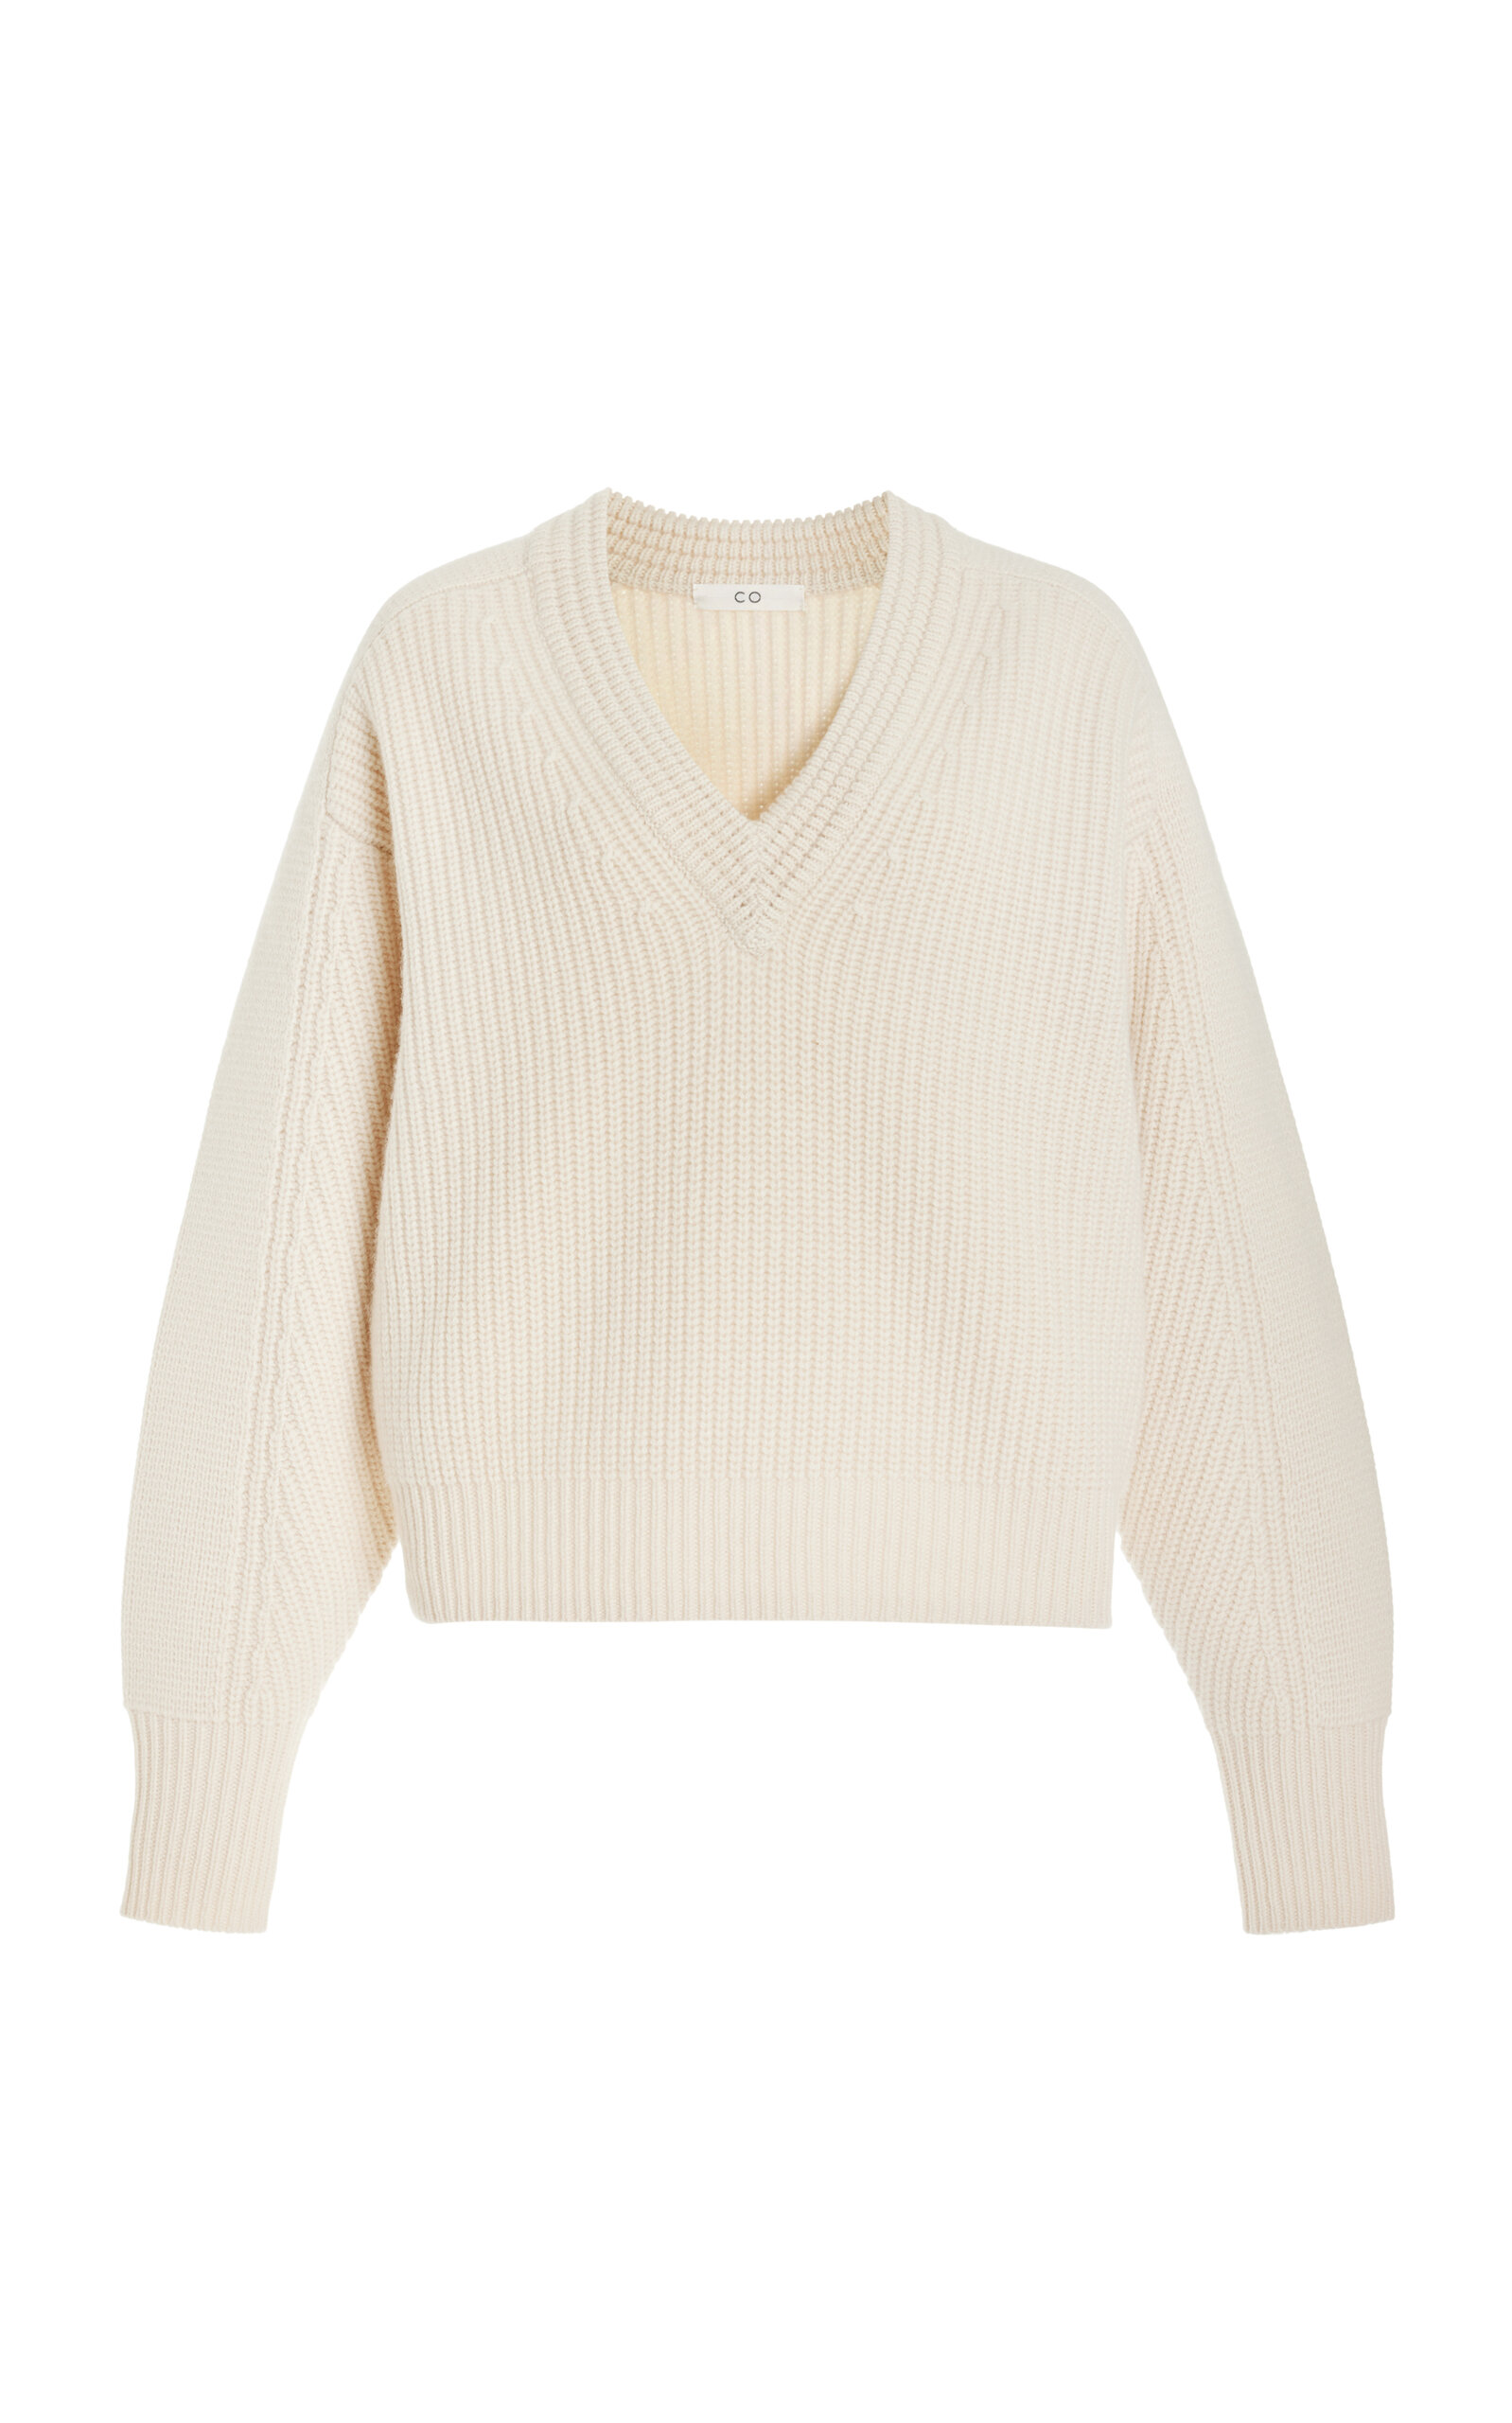 Co Cashmere Sweater In Ivory